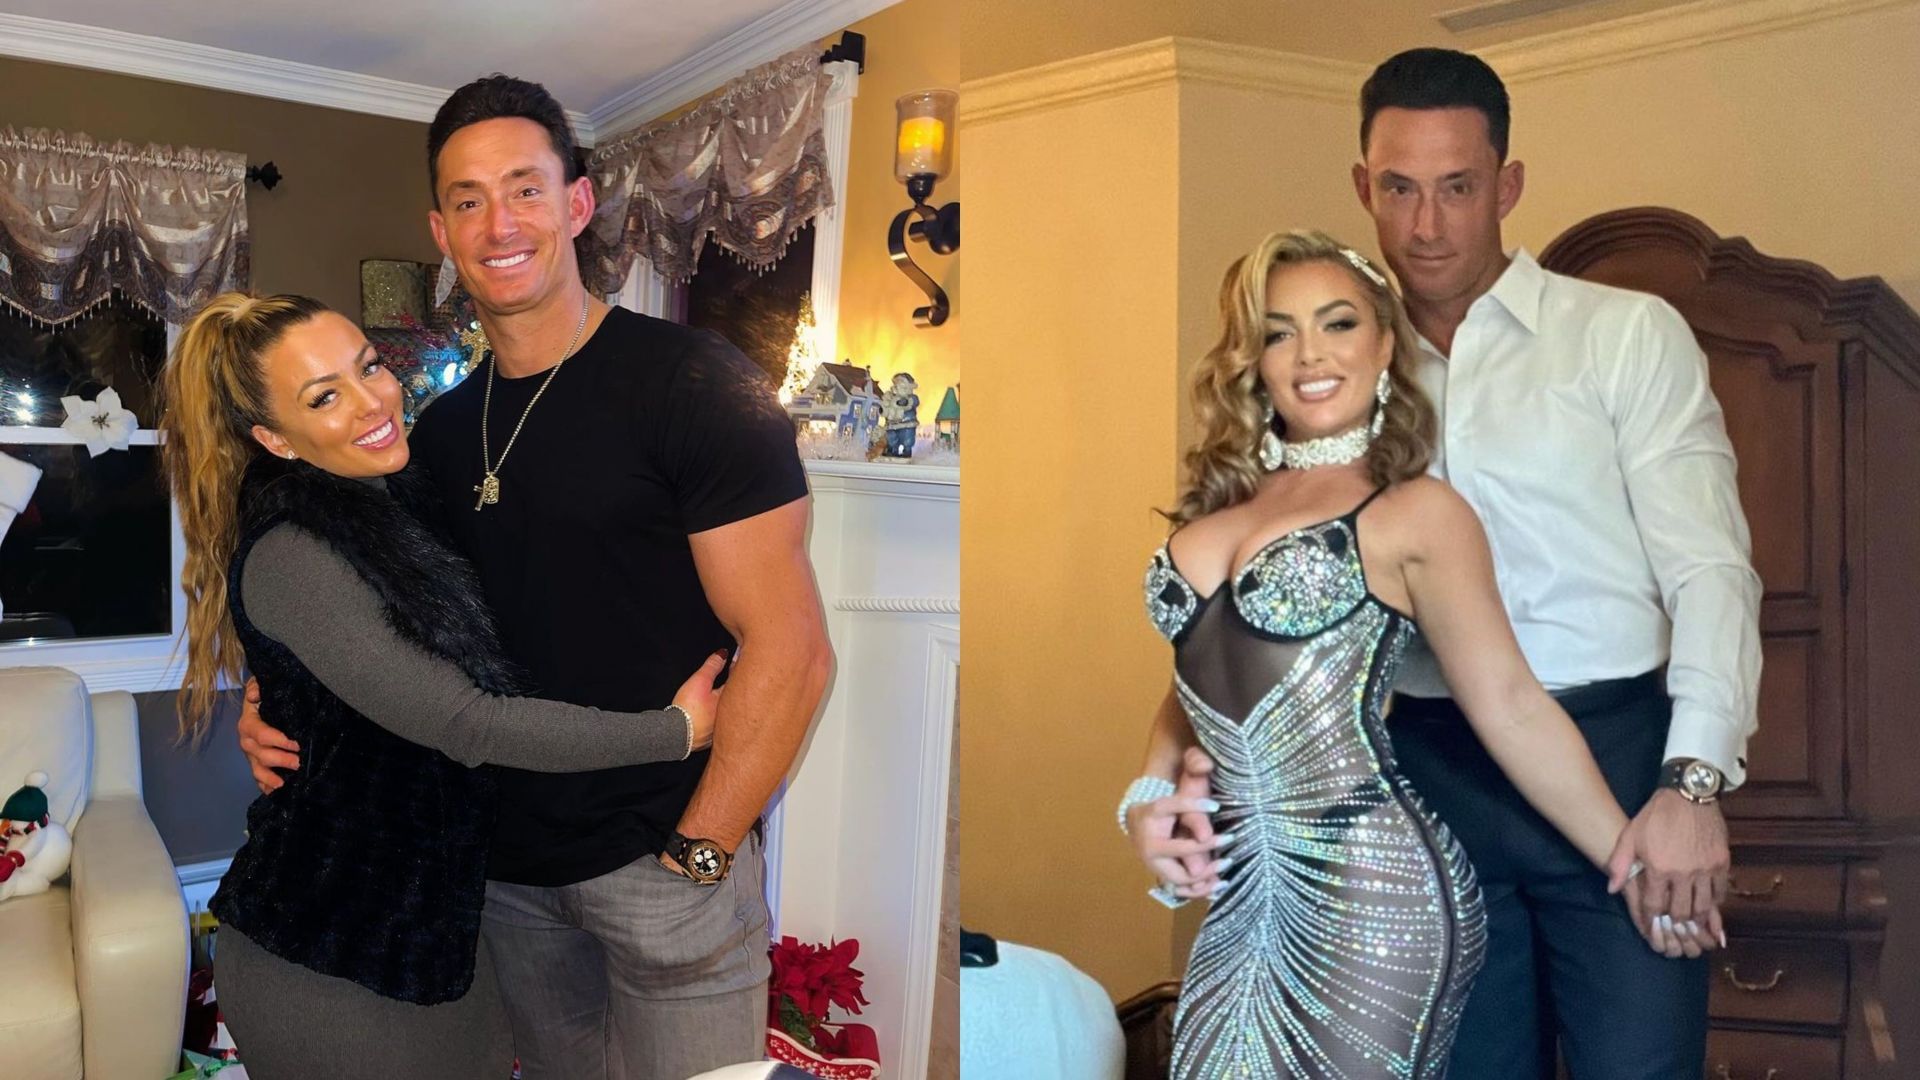 Former WWE star Mandy Rose is engaged to ex-NXT star Tino Sabbatelli (Images credit: Mandy Rose